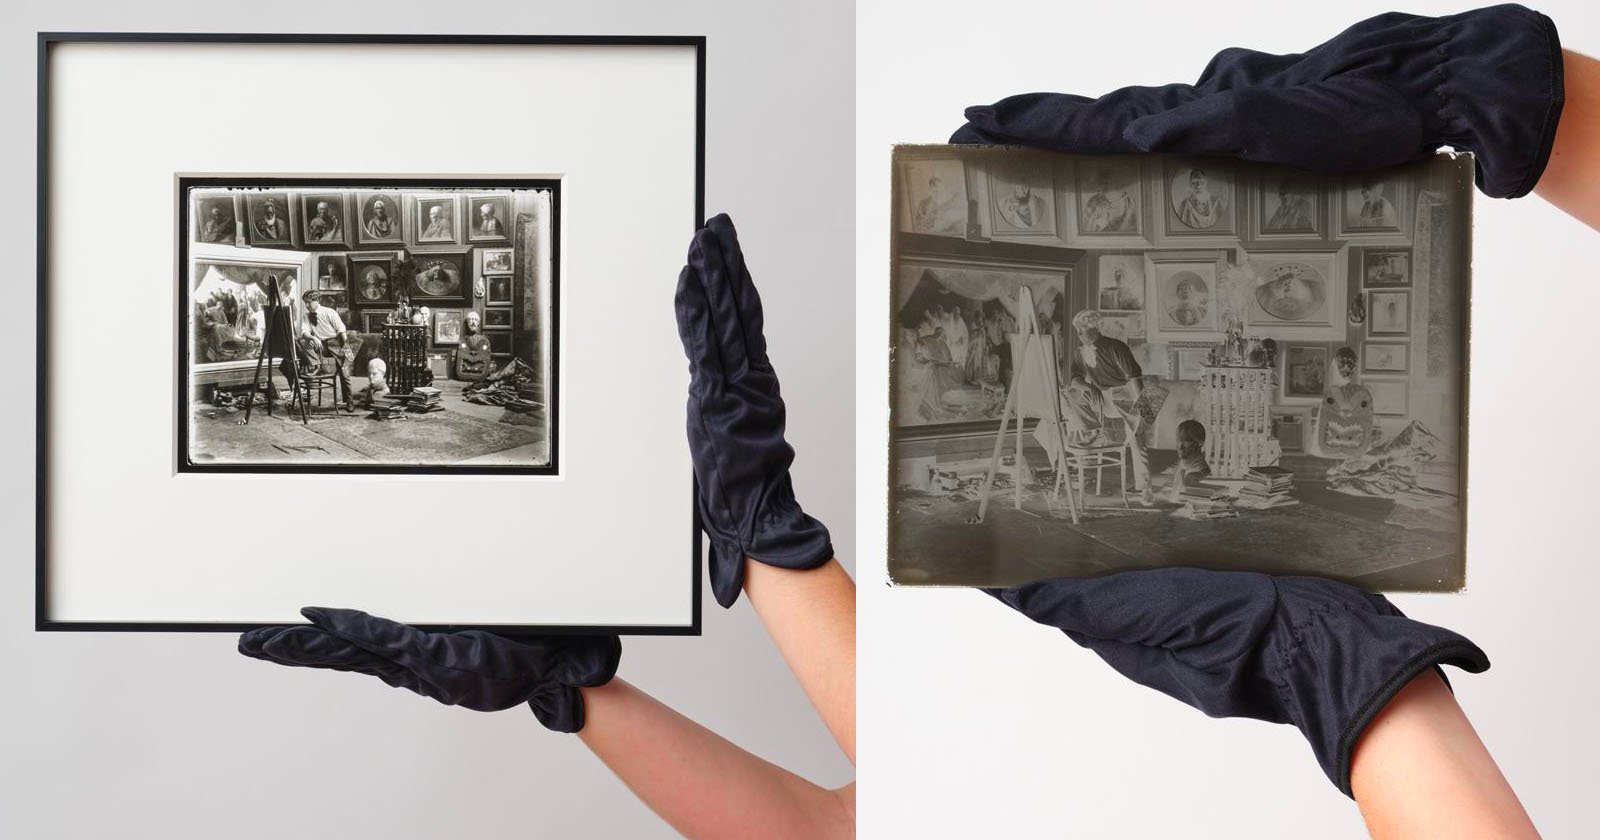 Historic Glass Plate Photos Sold as NFTs, Buyer Told to 'Smash' Originals